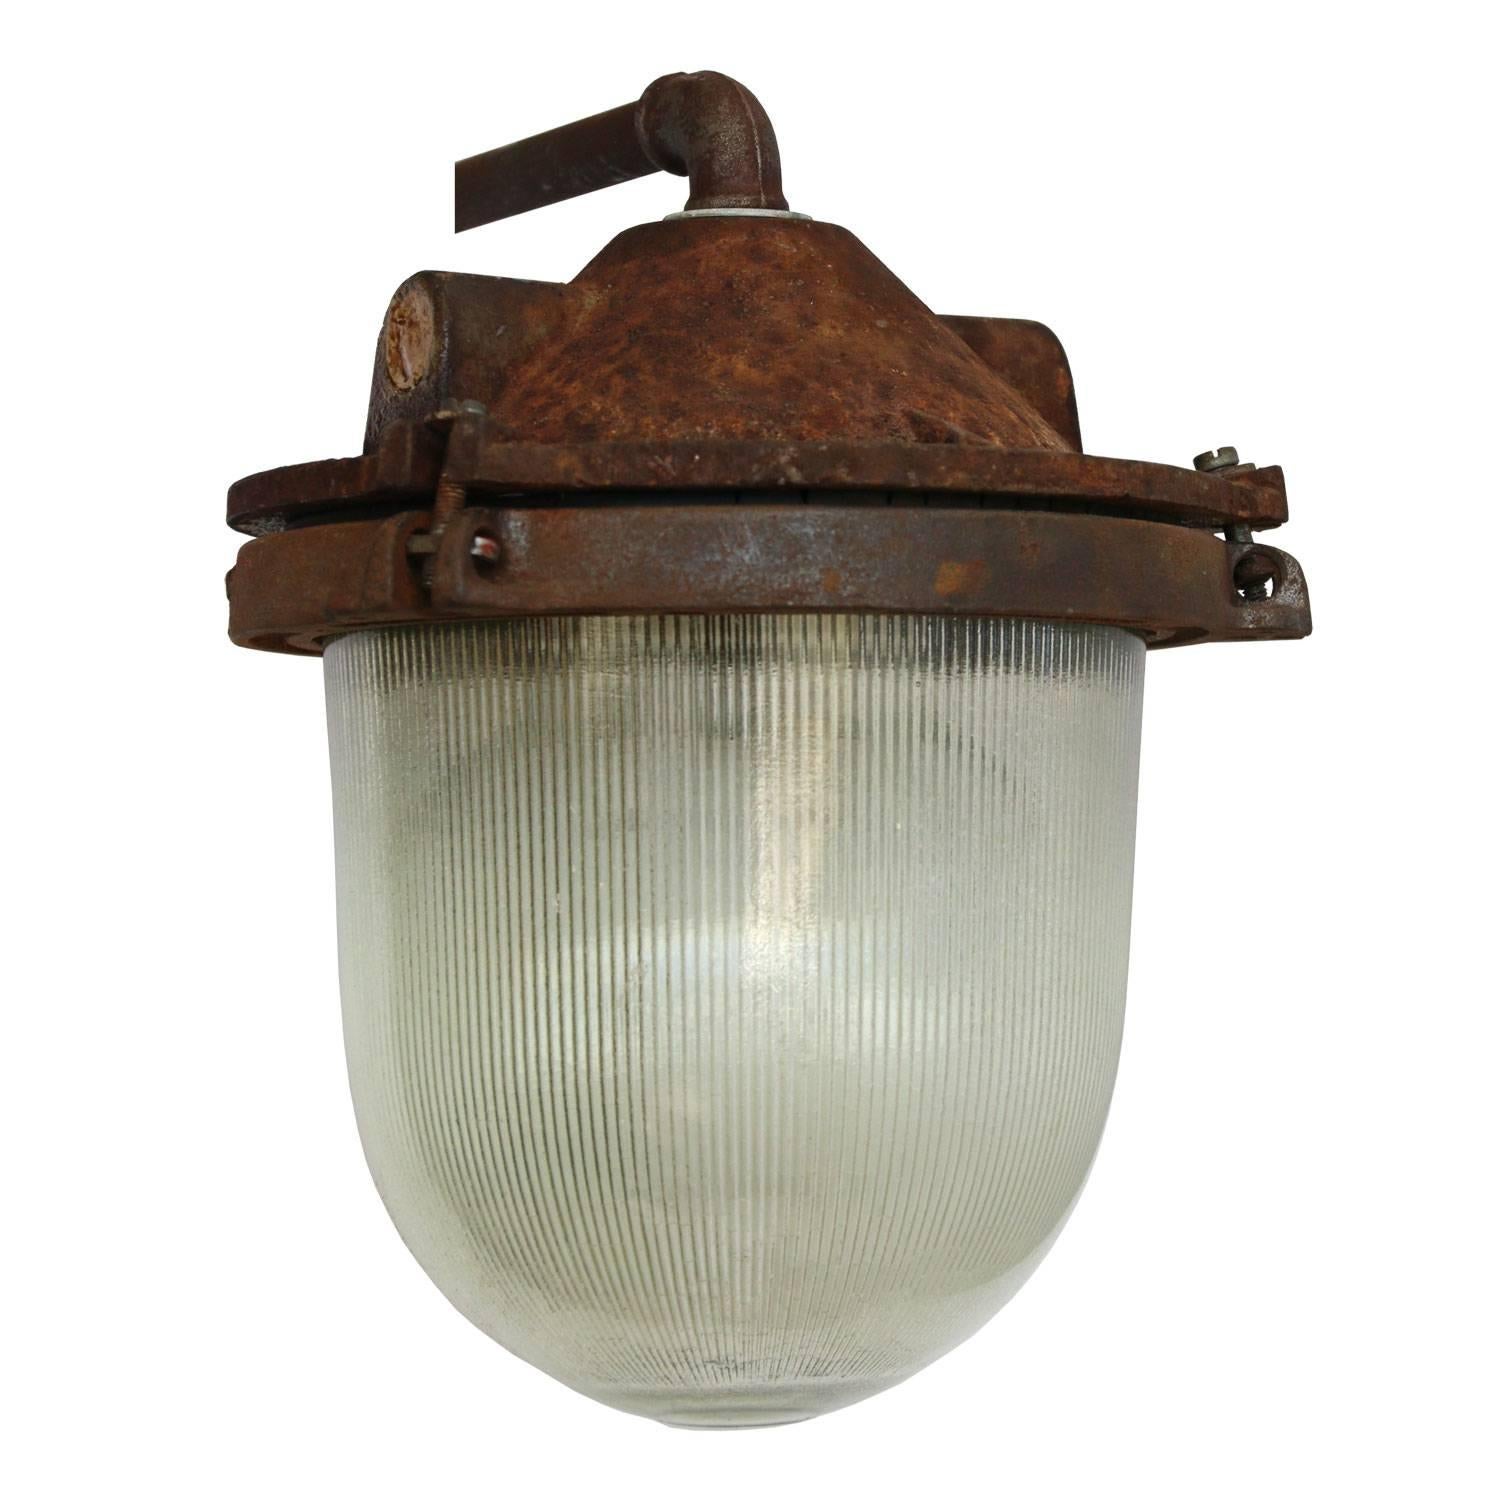 Cast iron industrial wall light. Holophane glass. Diameter cast iron wall piece: 12 cm, 3 holes to secure.

Weight: 7.5 kg / 16.5 lb

Priced individual item. All lamps have been made suitable by international standards for incandescent light